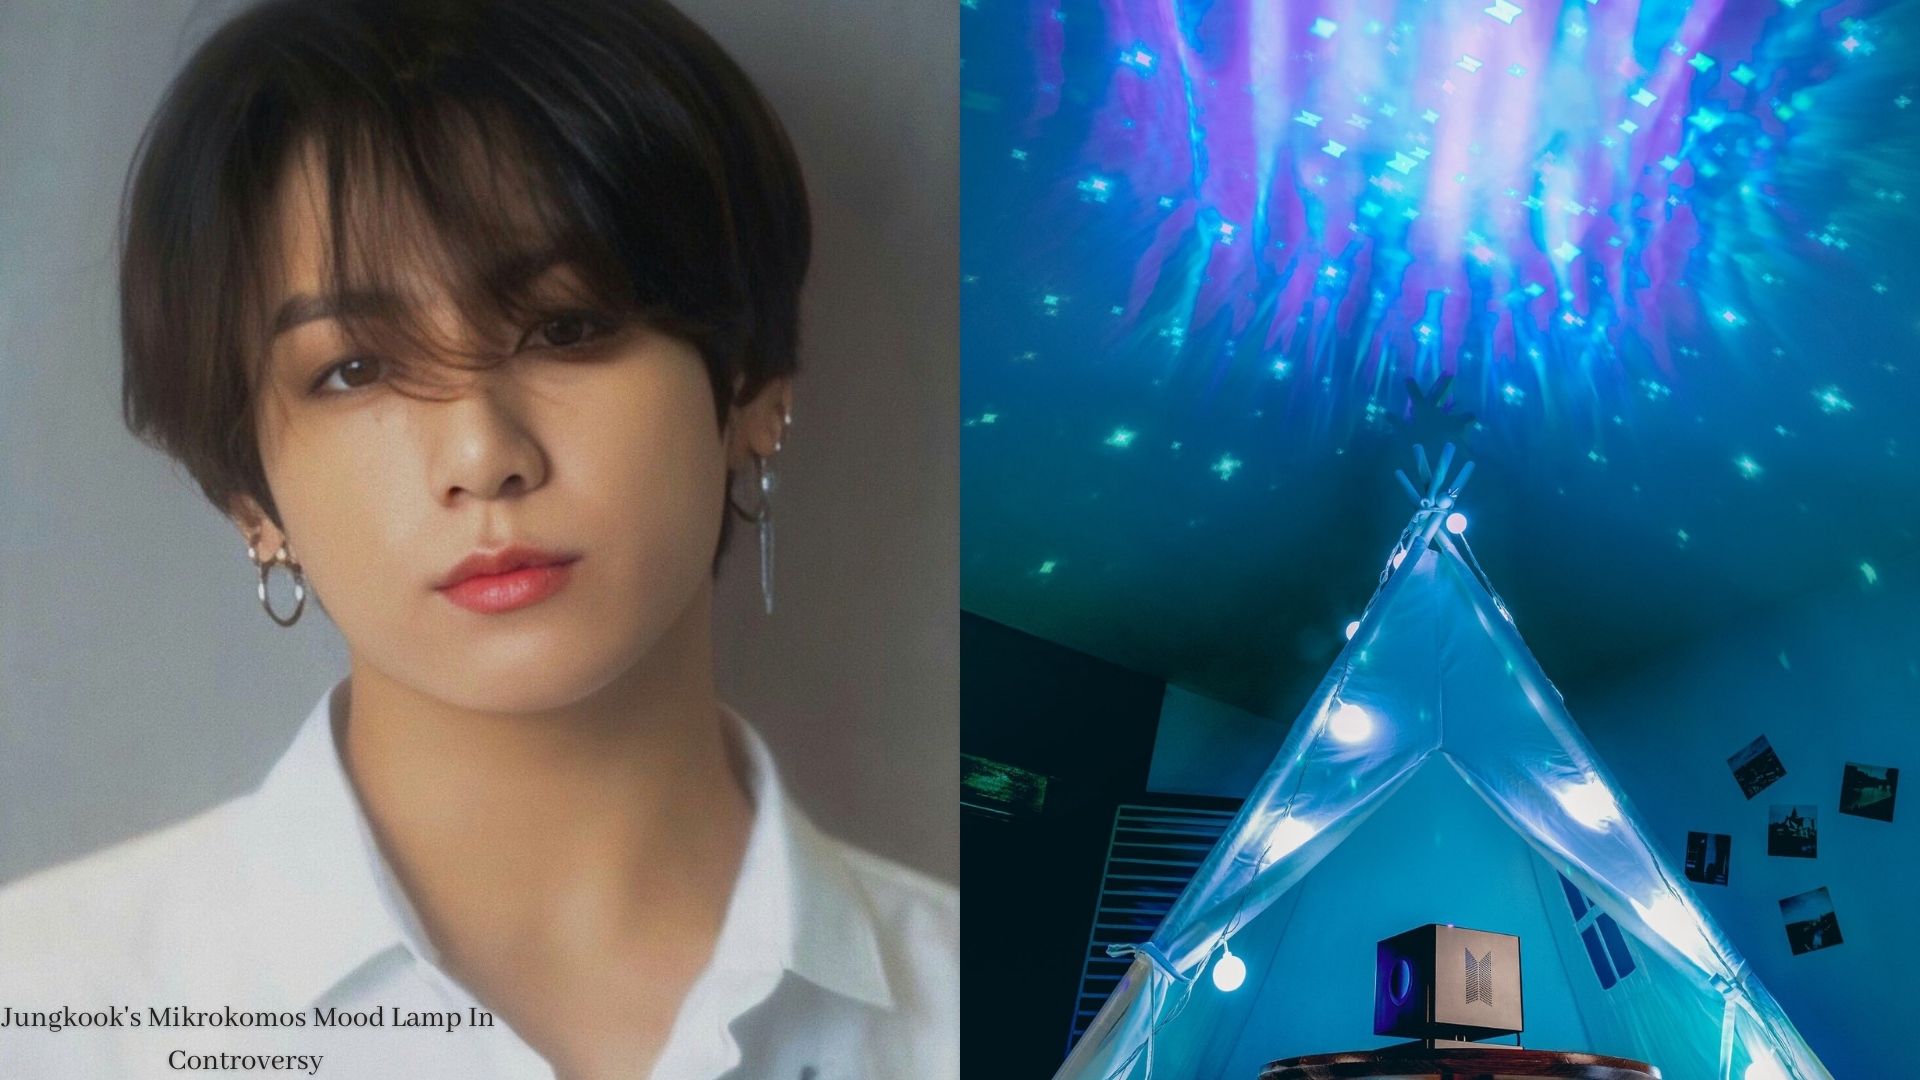 Jungkook’s Mikrokosmos Mood Lamp: HYBE Criticized for Cultural Appropriation